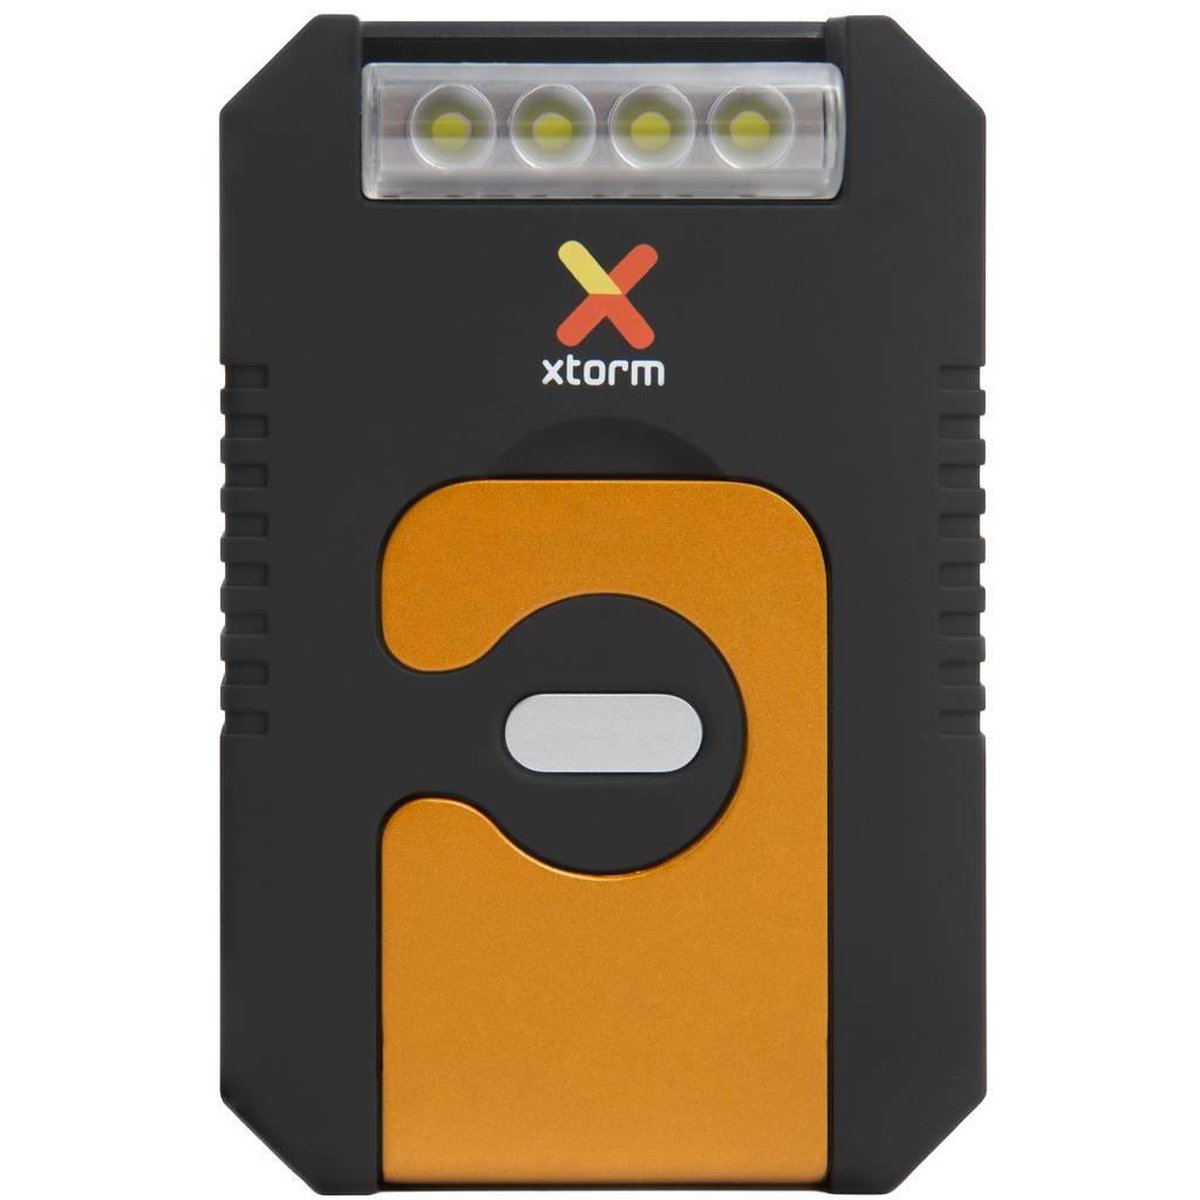 Xtorm Magma solar charger - Mobiele solar oplader met Led / Back-up accu - 2000 mAh - AM115